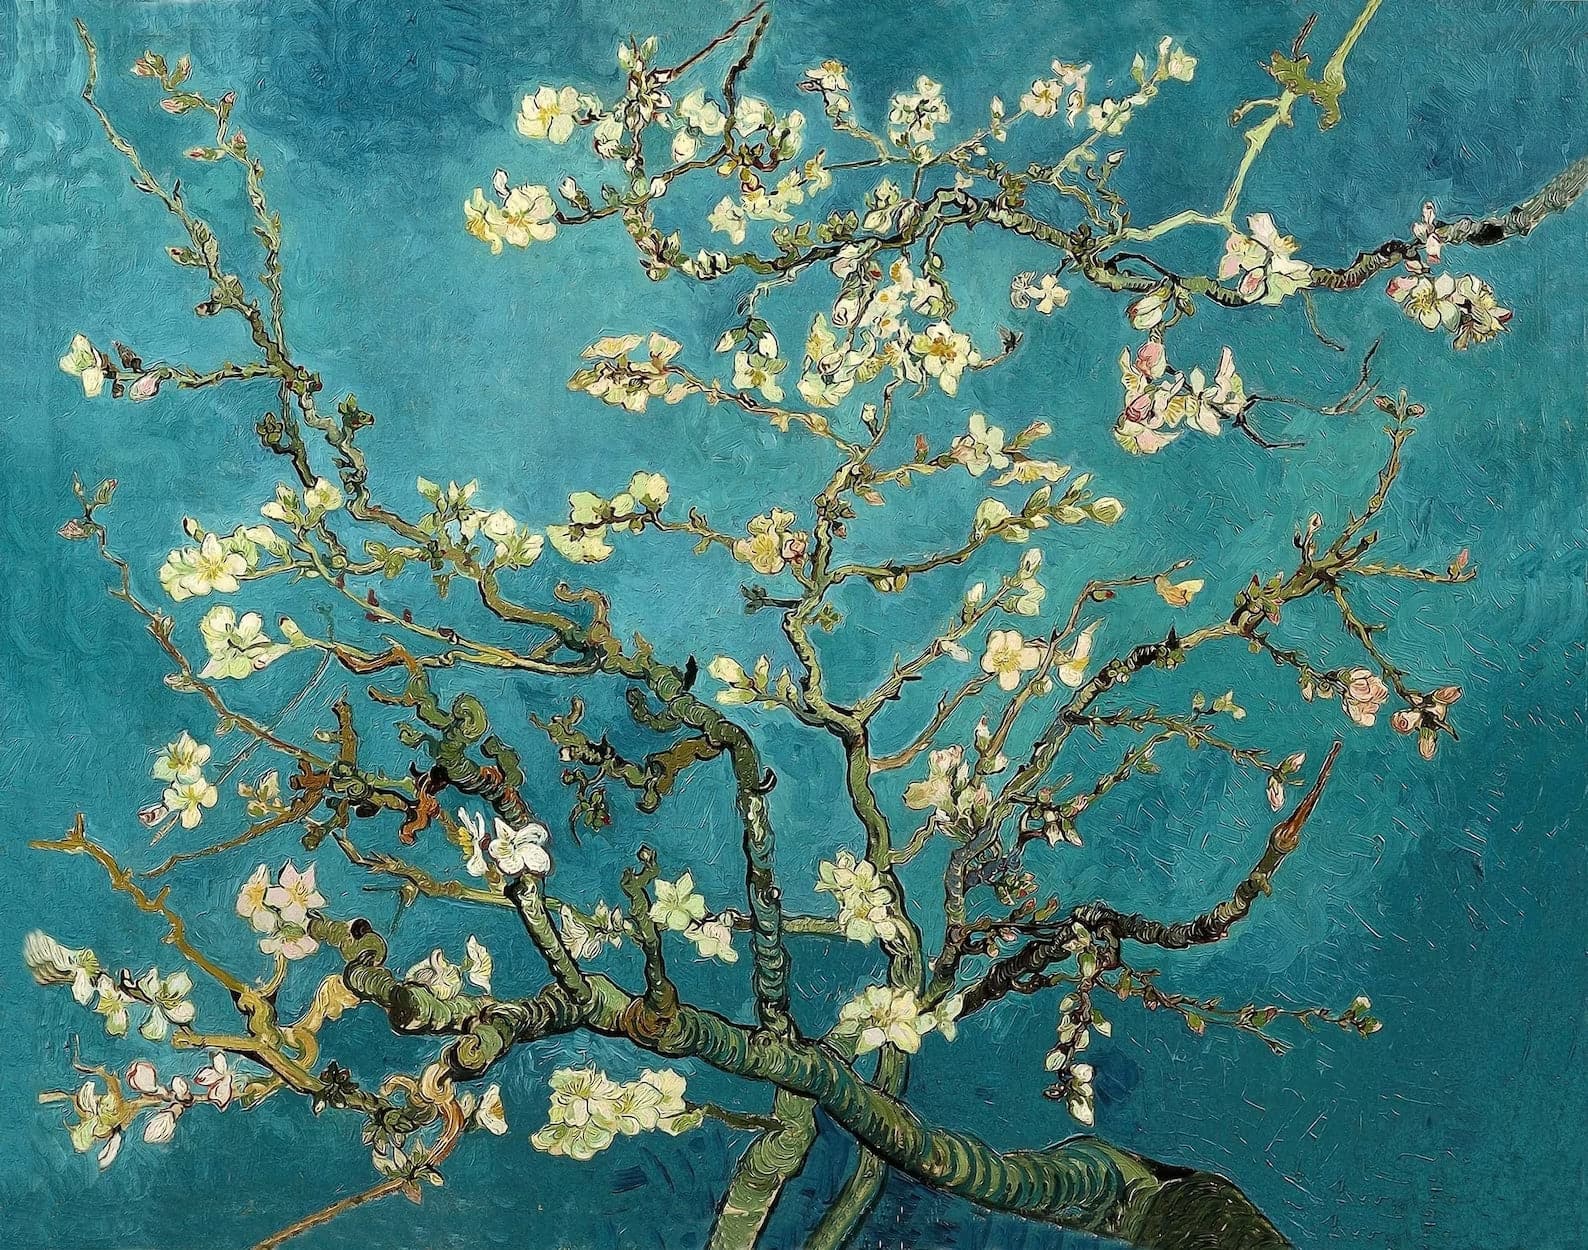 Framed 1 Panel - Almond-Blossoms by Van Gogh